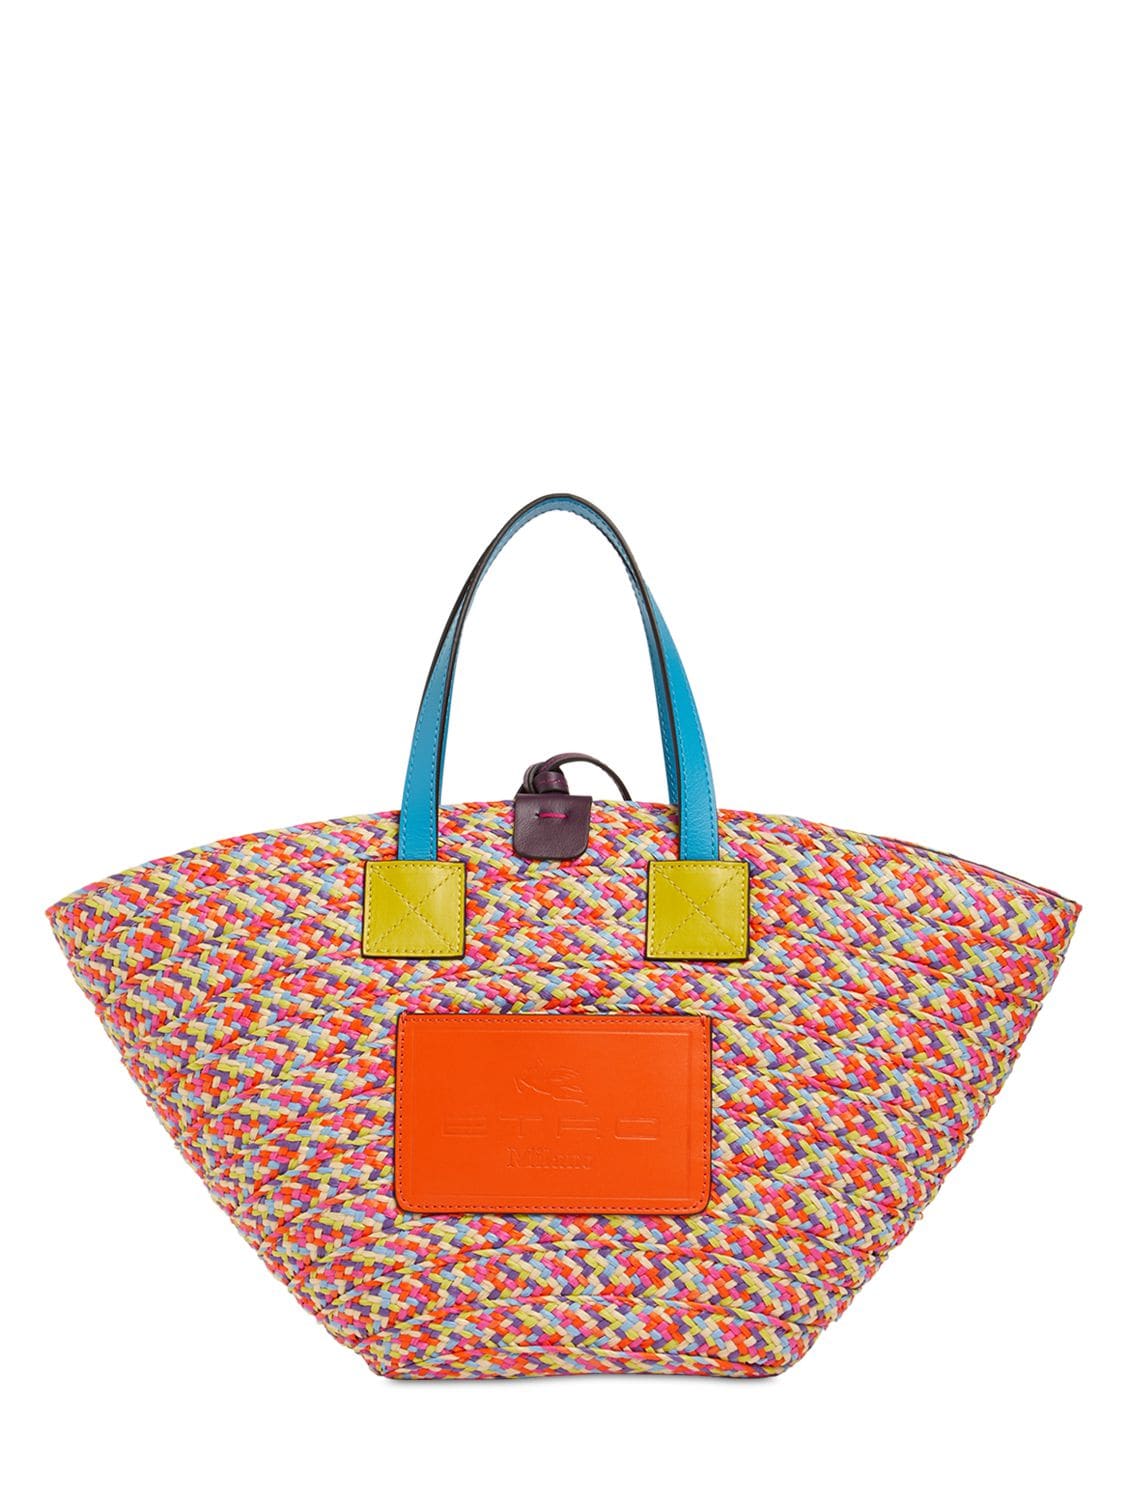 Etro Logo Straw Effect & Leather Tote Bag In Multicolor | ModeSens